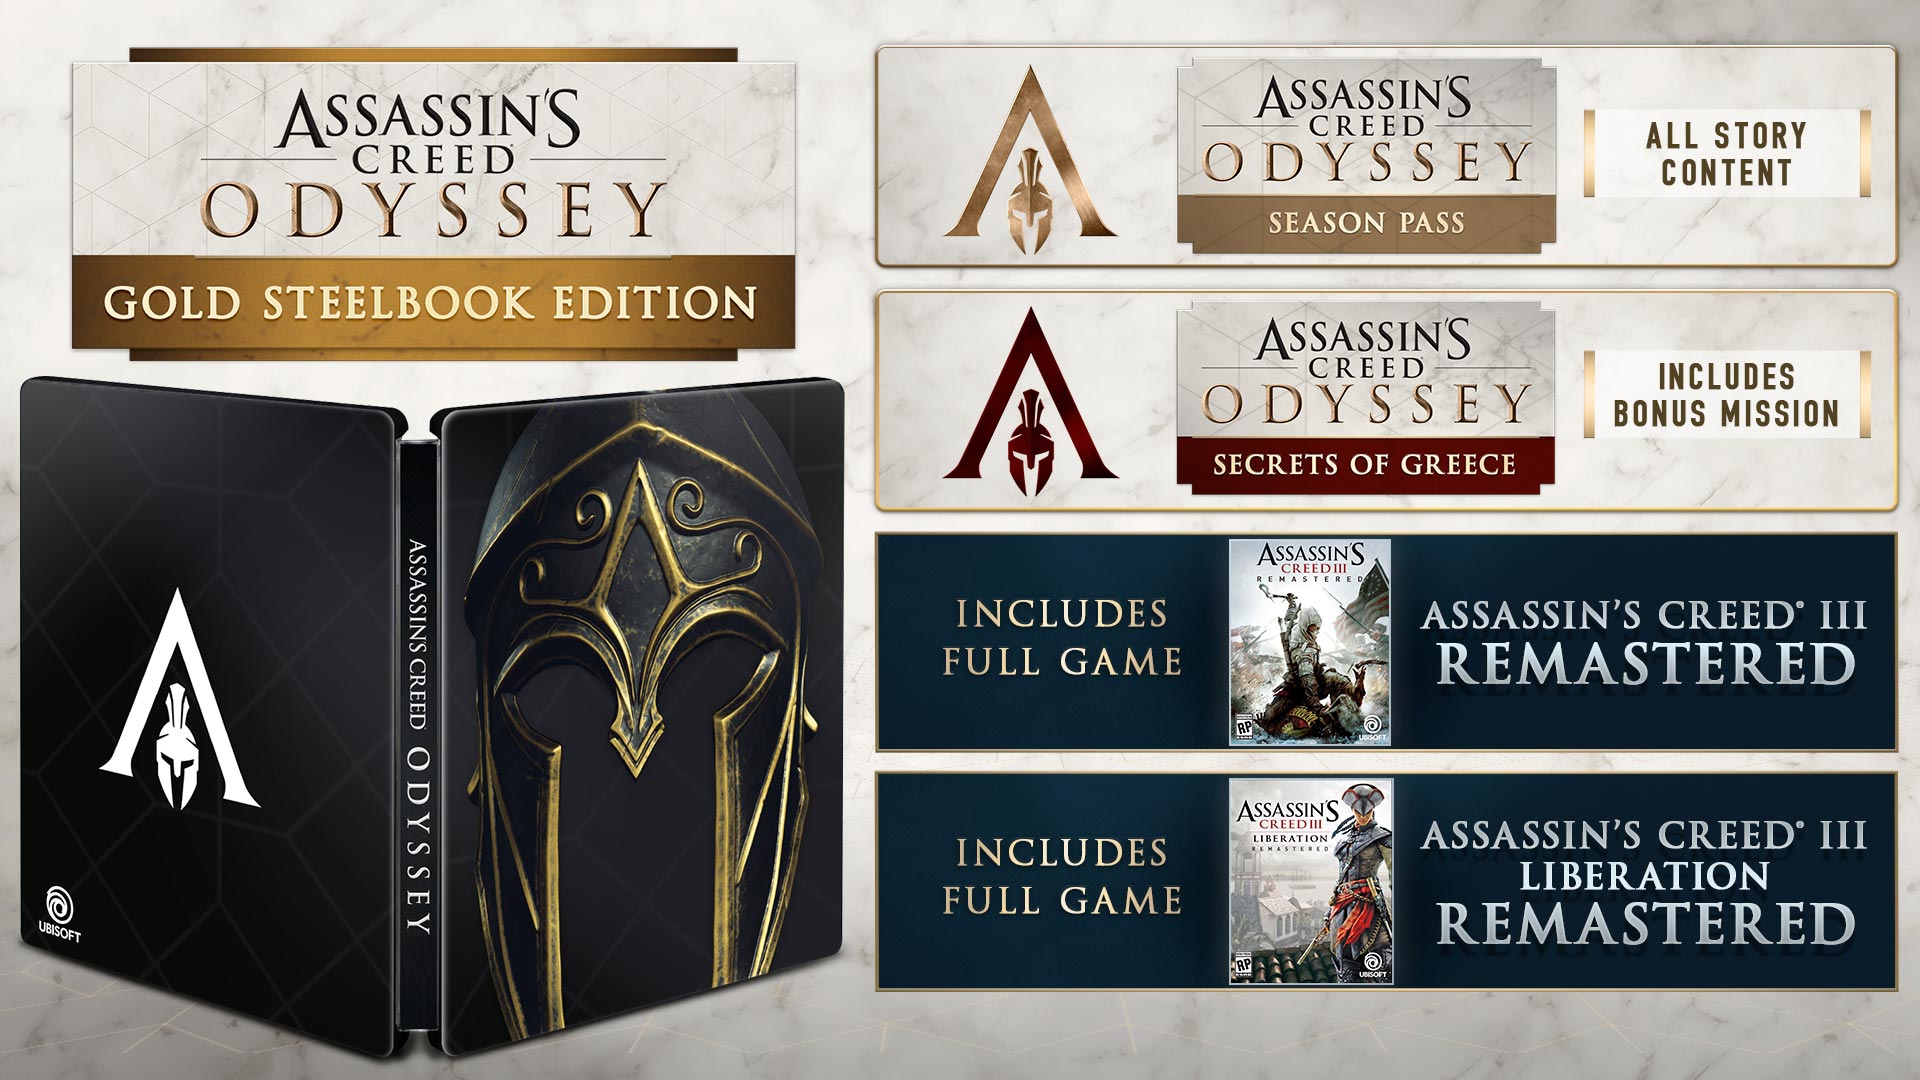 Content for Assassin's Creed Odyssey - Xbox One.